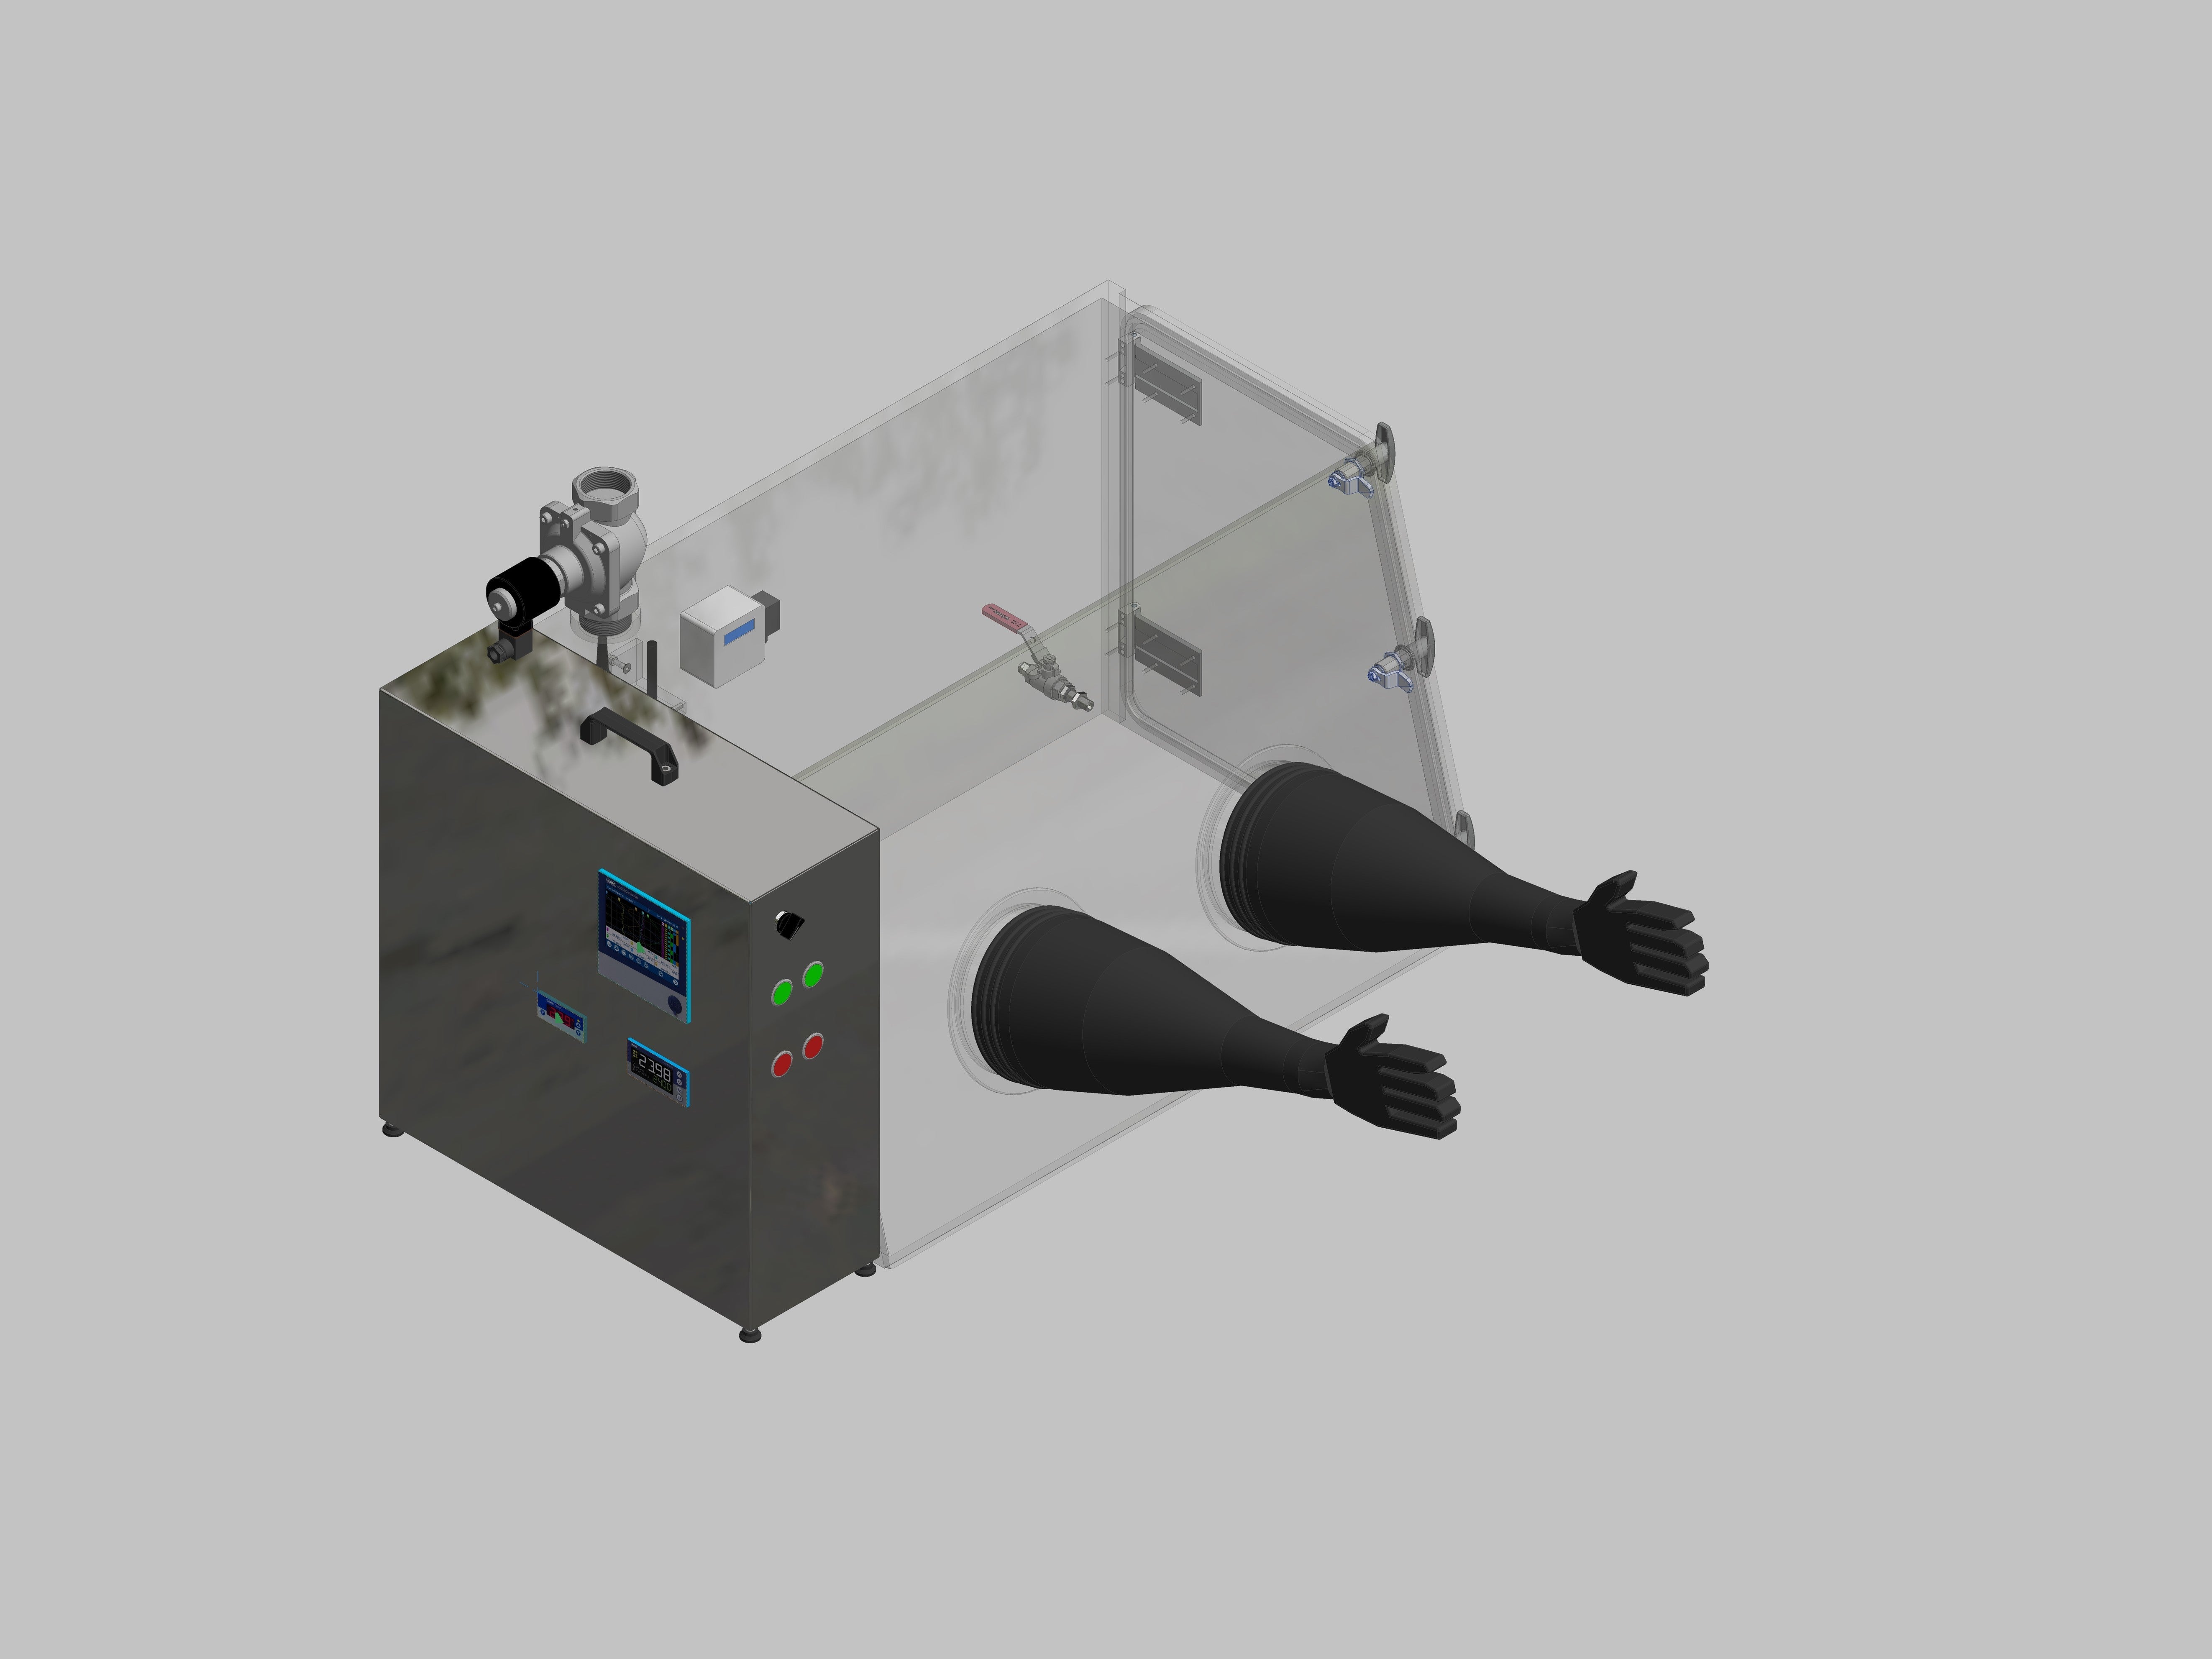 Glovebox made of acrylic&gt; Gas filling: automatic flushing with pressure control, front version: standard, side version: hinged doors Control: oxygen regulator and humidity display with data logger